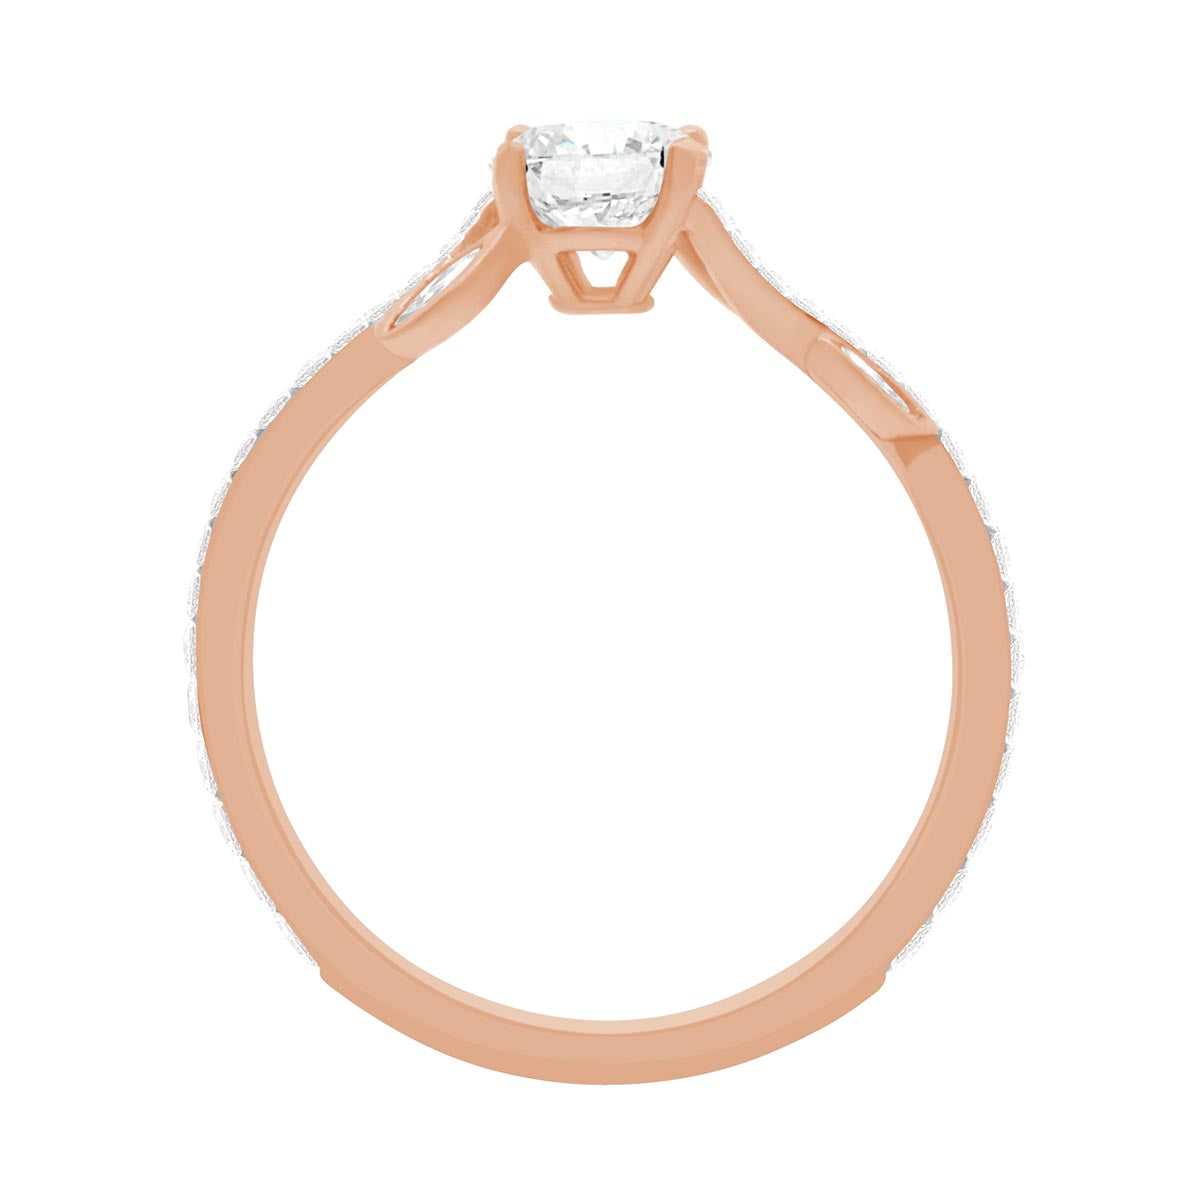 Floral Engagement Ring made from Red gold in an upstanding position